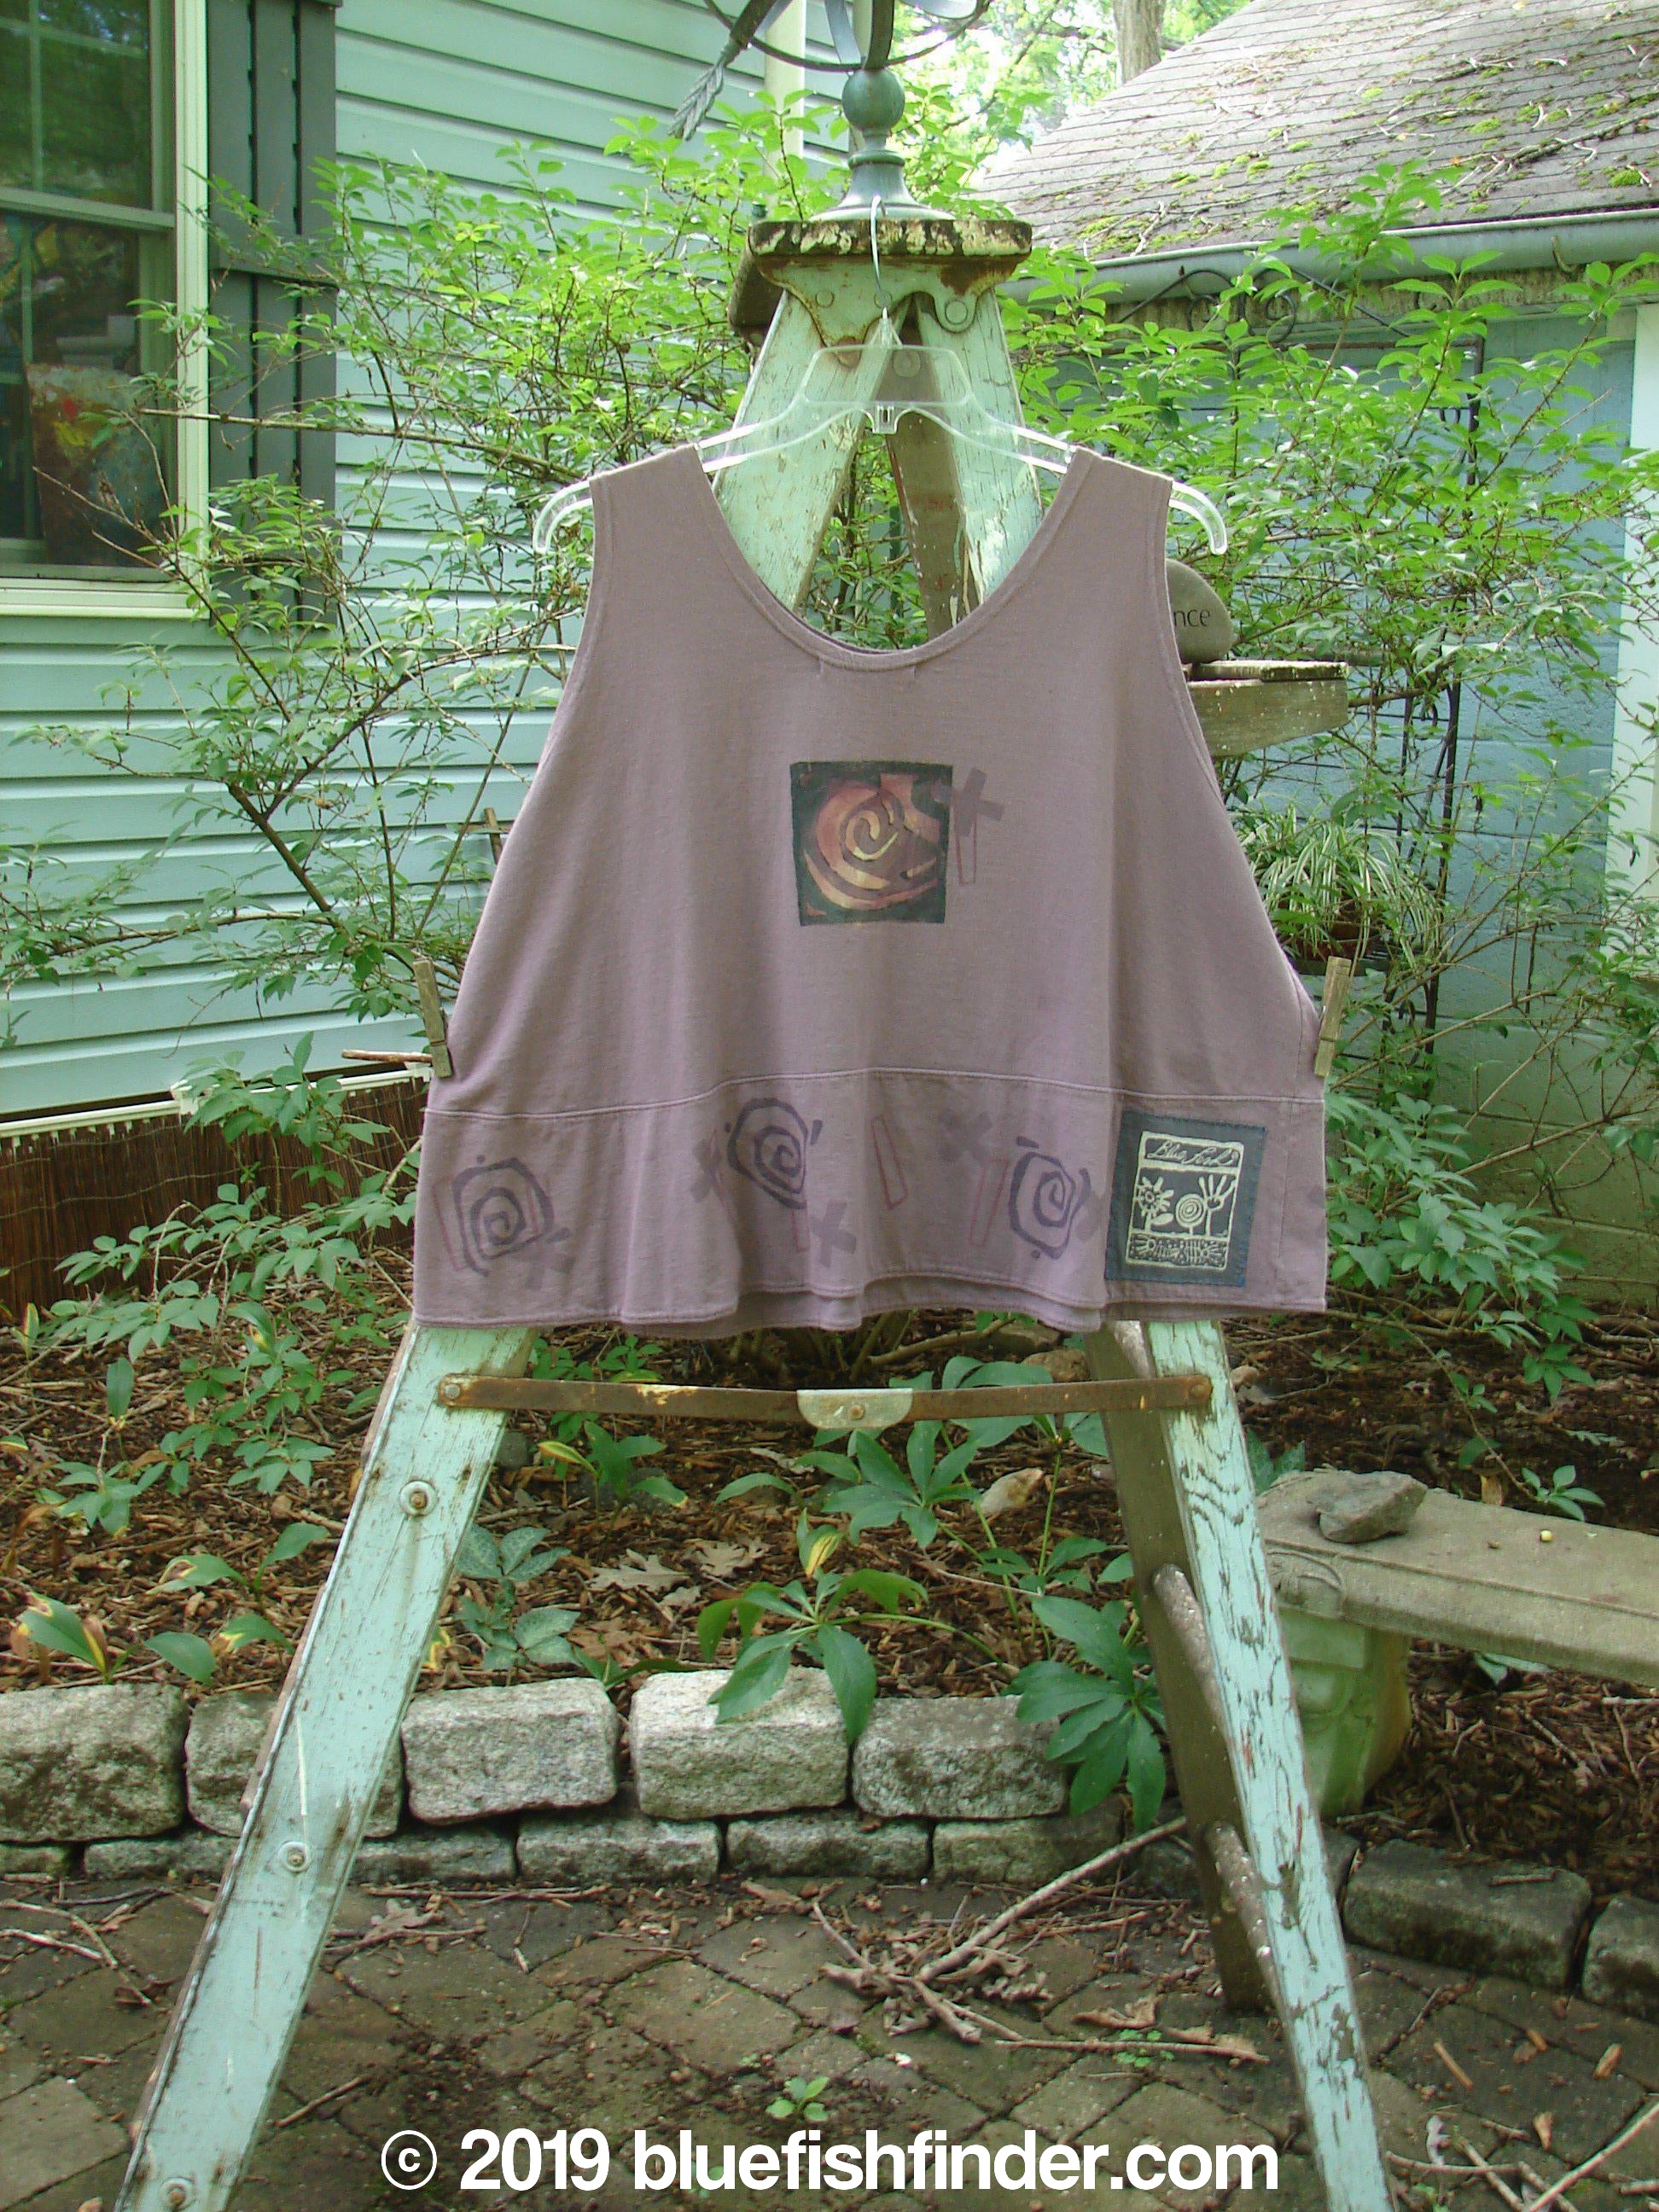 1995 Klee Button Top Cathedral Madder Lake Size 2: A swingy purple shirt on a wooden ladder, with a close-up of a painting and a sign.